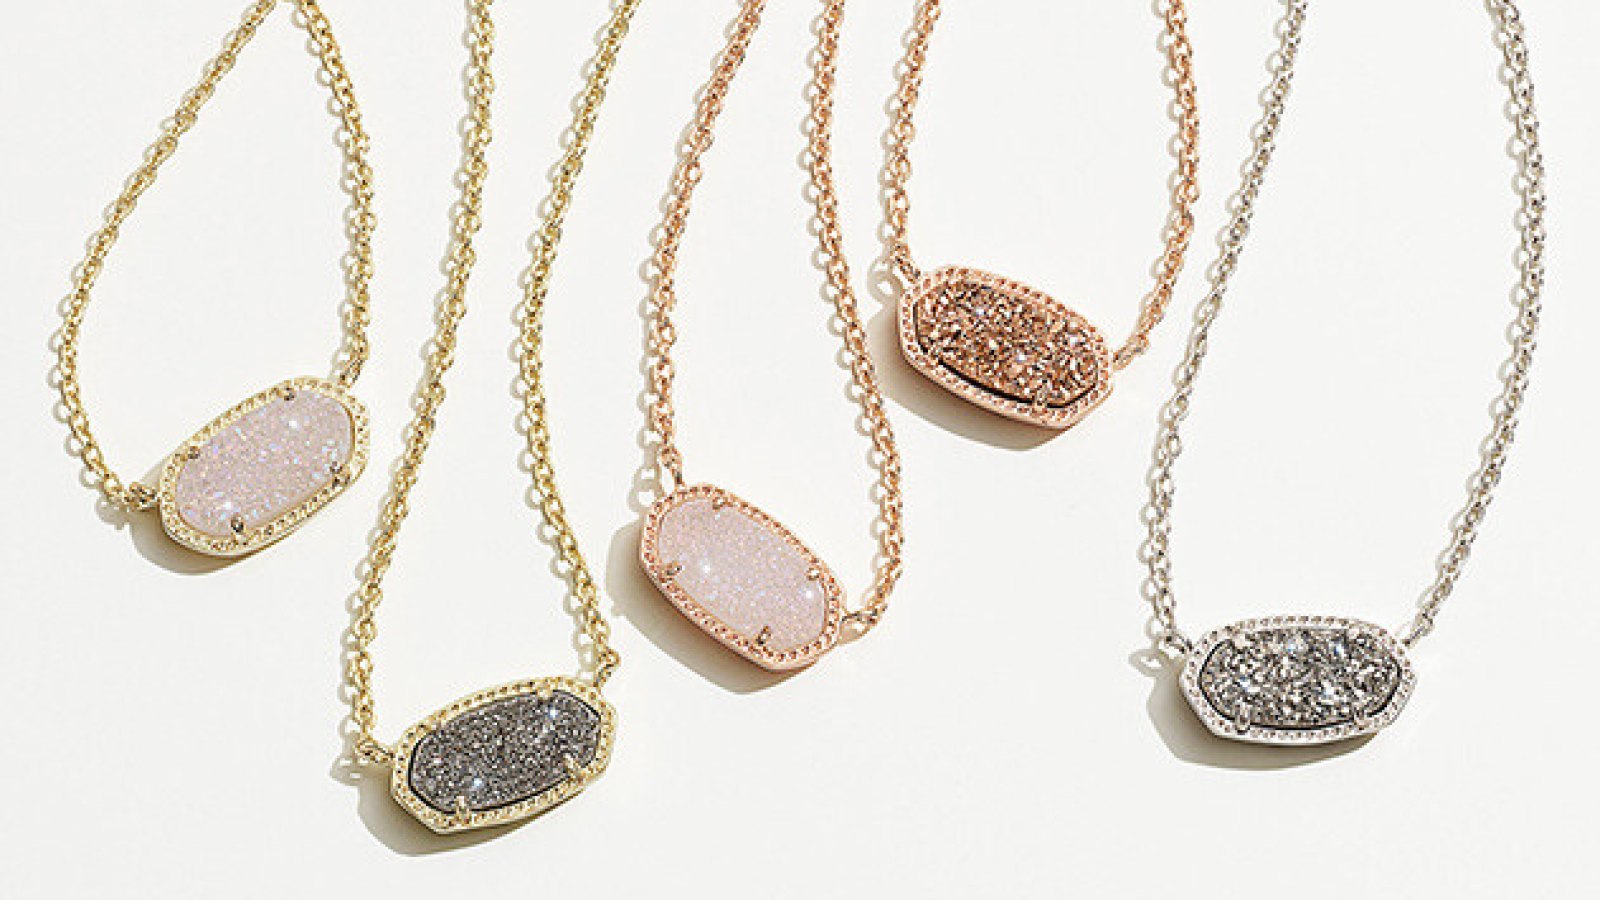 Check Out This Celeb-Loved Jewelry From Kendra Scott